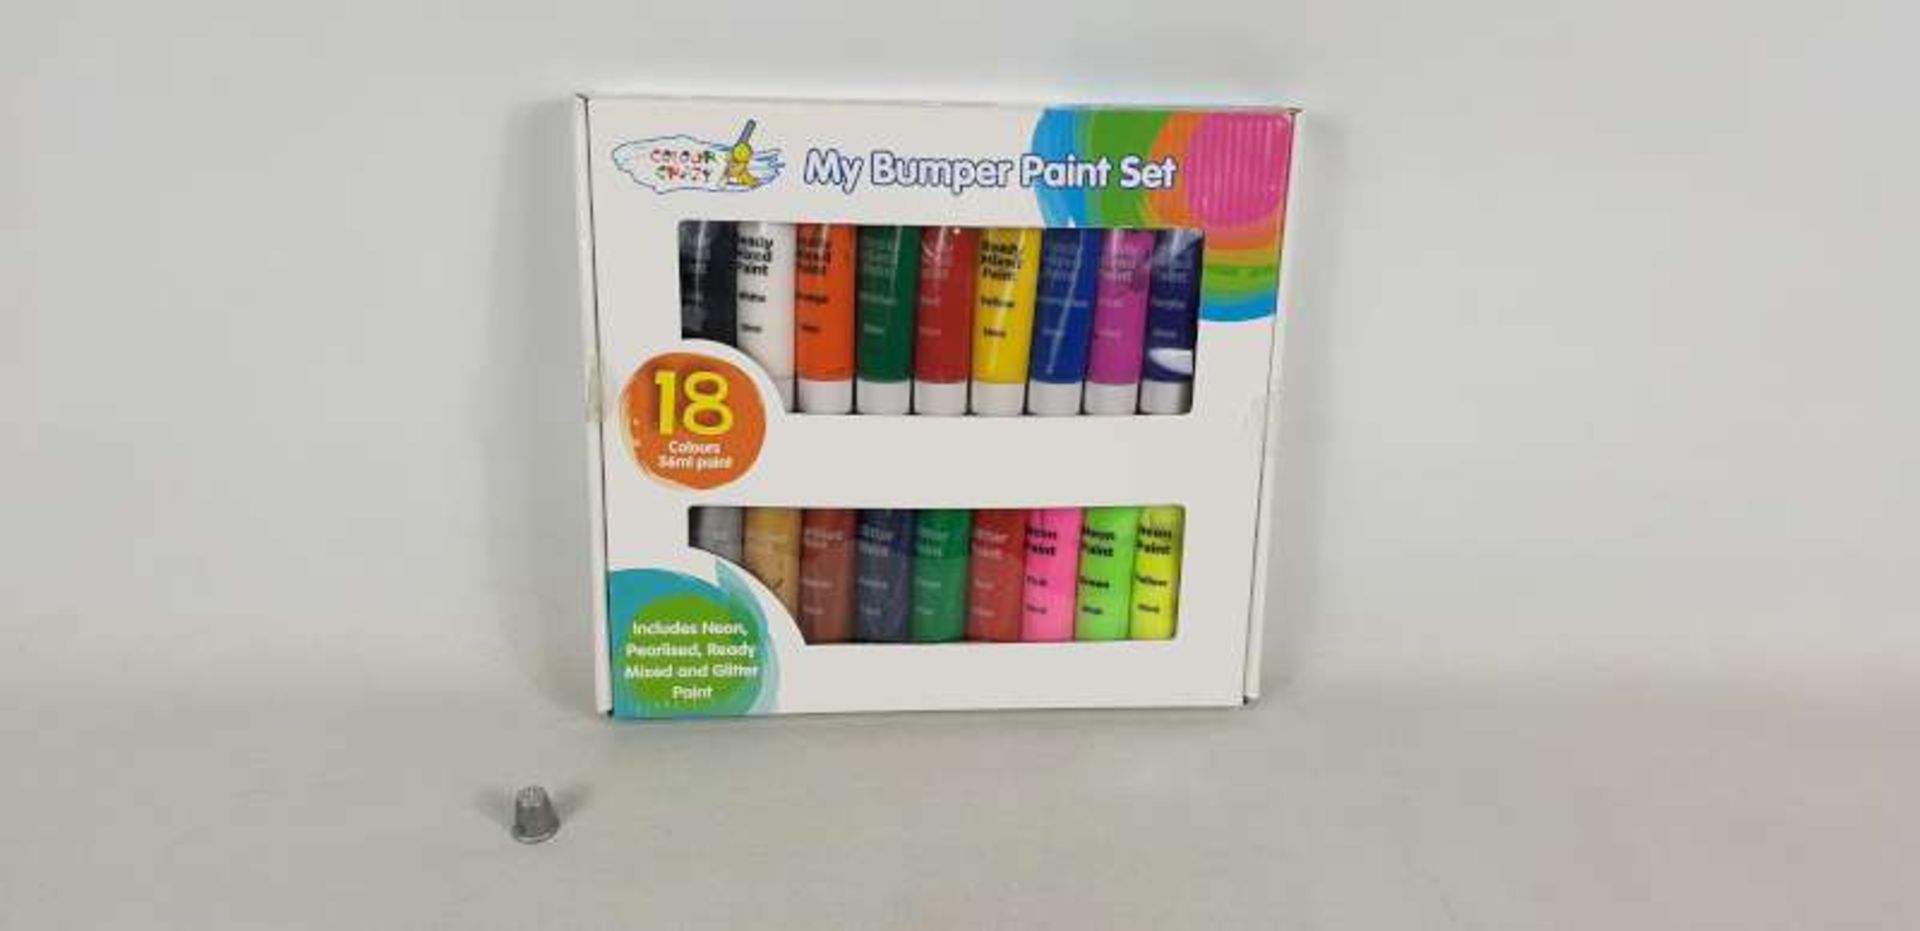 48 X 18 PIECE MY BUMPER PAINT SETS IN 6 BOXES